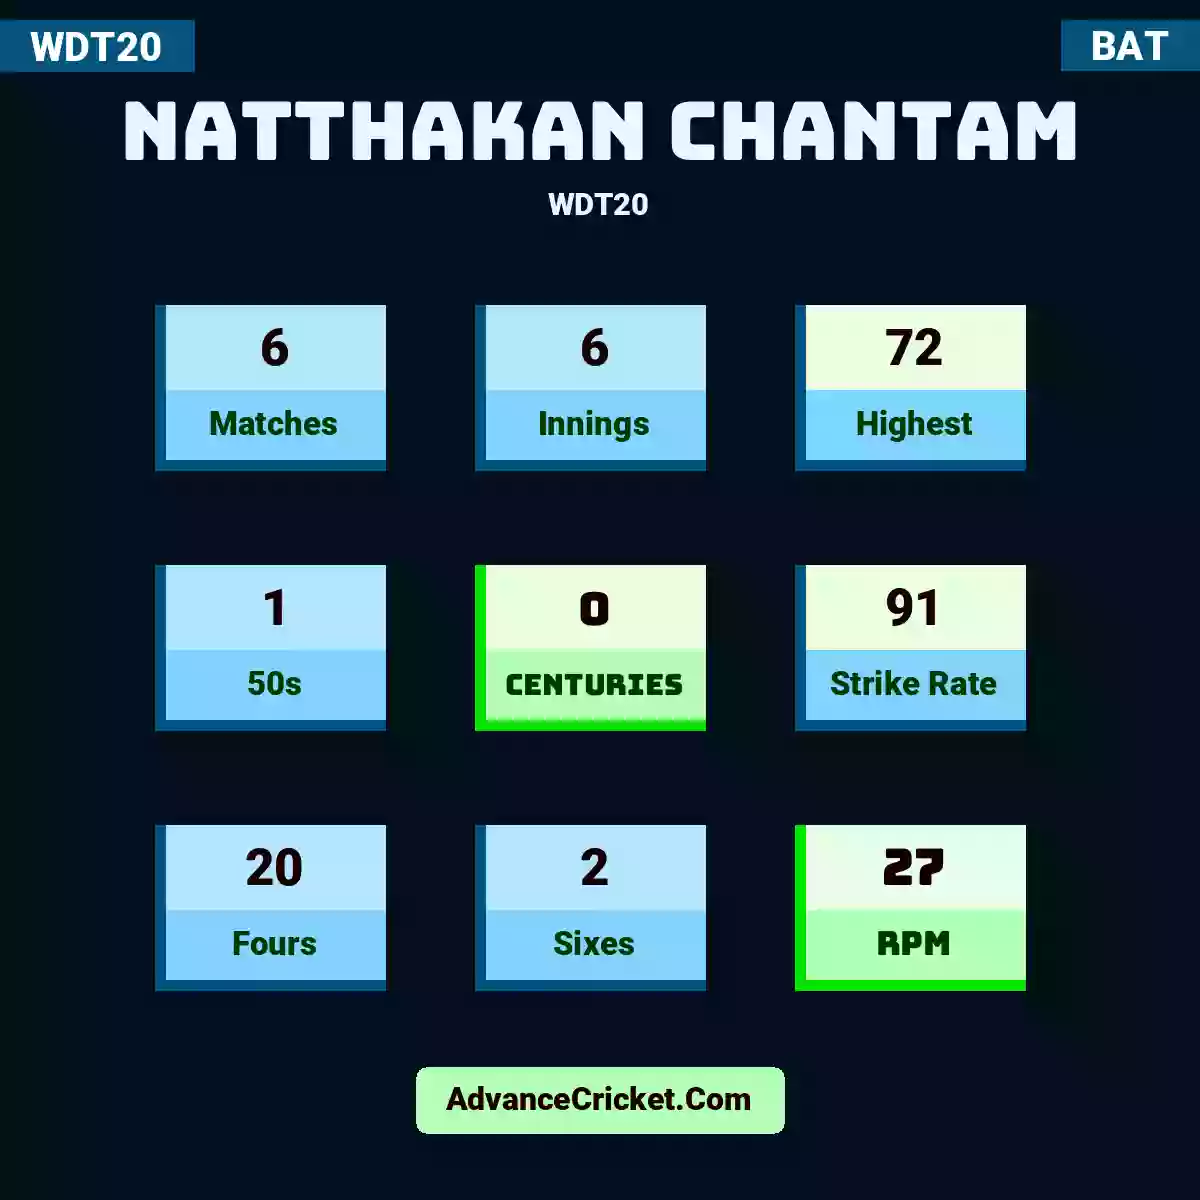 Natthakan Chantam WDT20 , Natthakan Chantam played 6 matches, scored 72 runs as highest, 1 half-centuries, and 0 centuries, with a strike rate of 91. N.Chantam hit 20 fours and 2 sixes, with an RPM of 27.